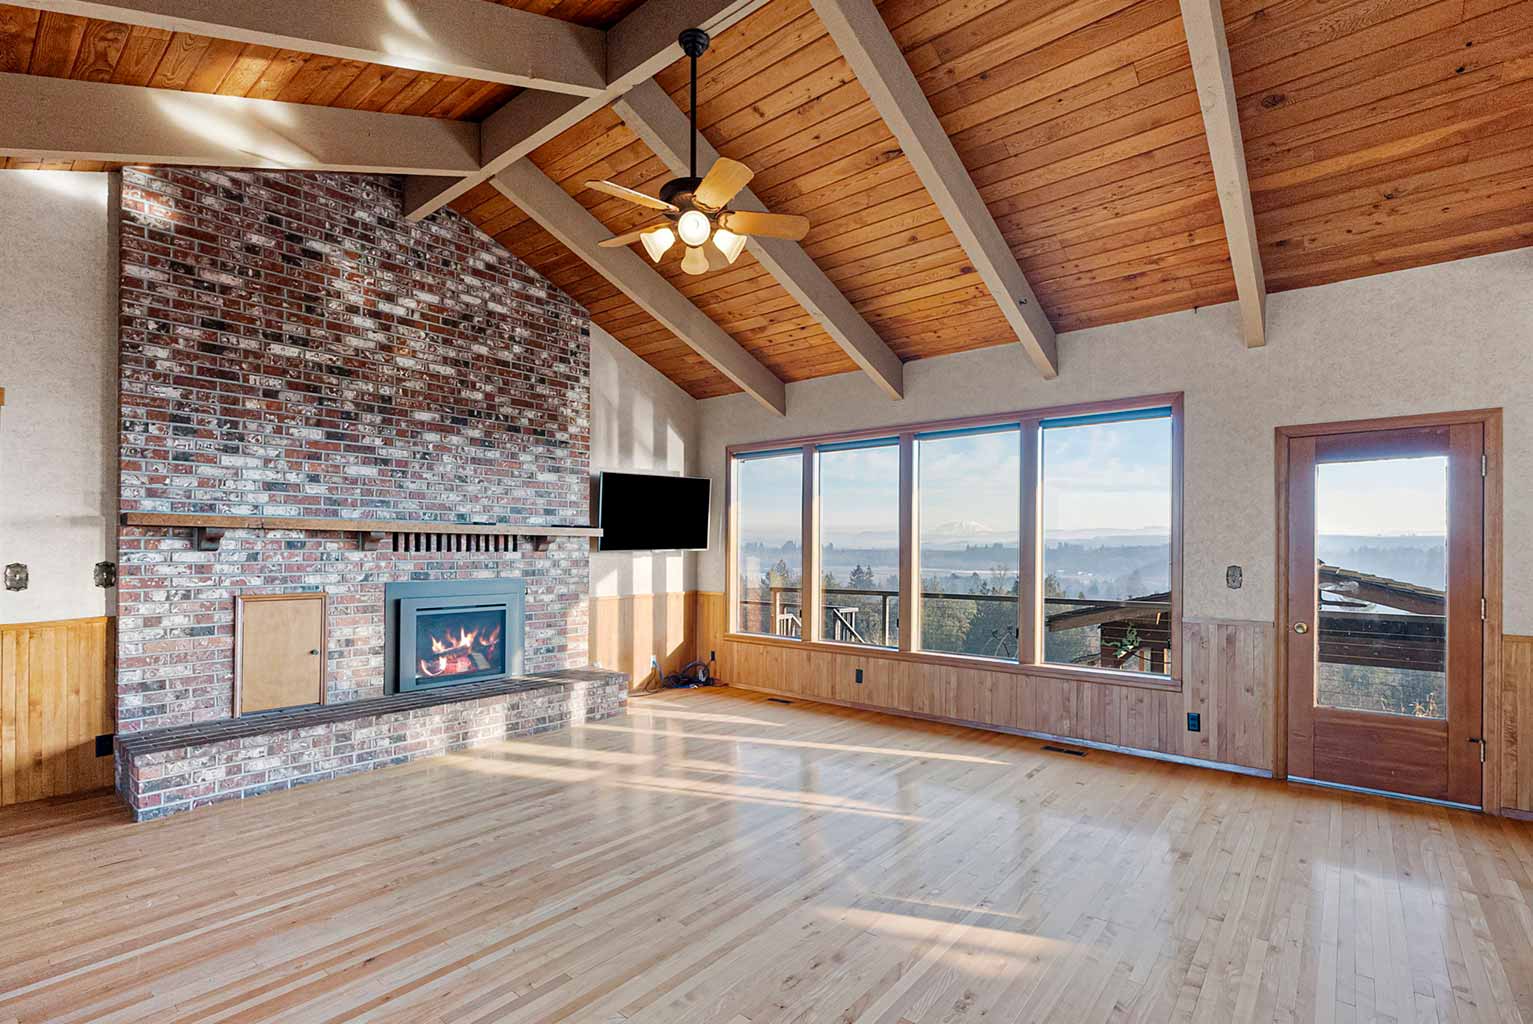 Impressive family room with vaulted ceiling and gas fireplace